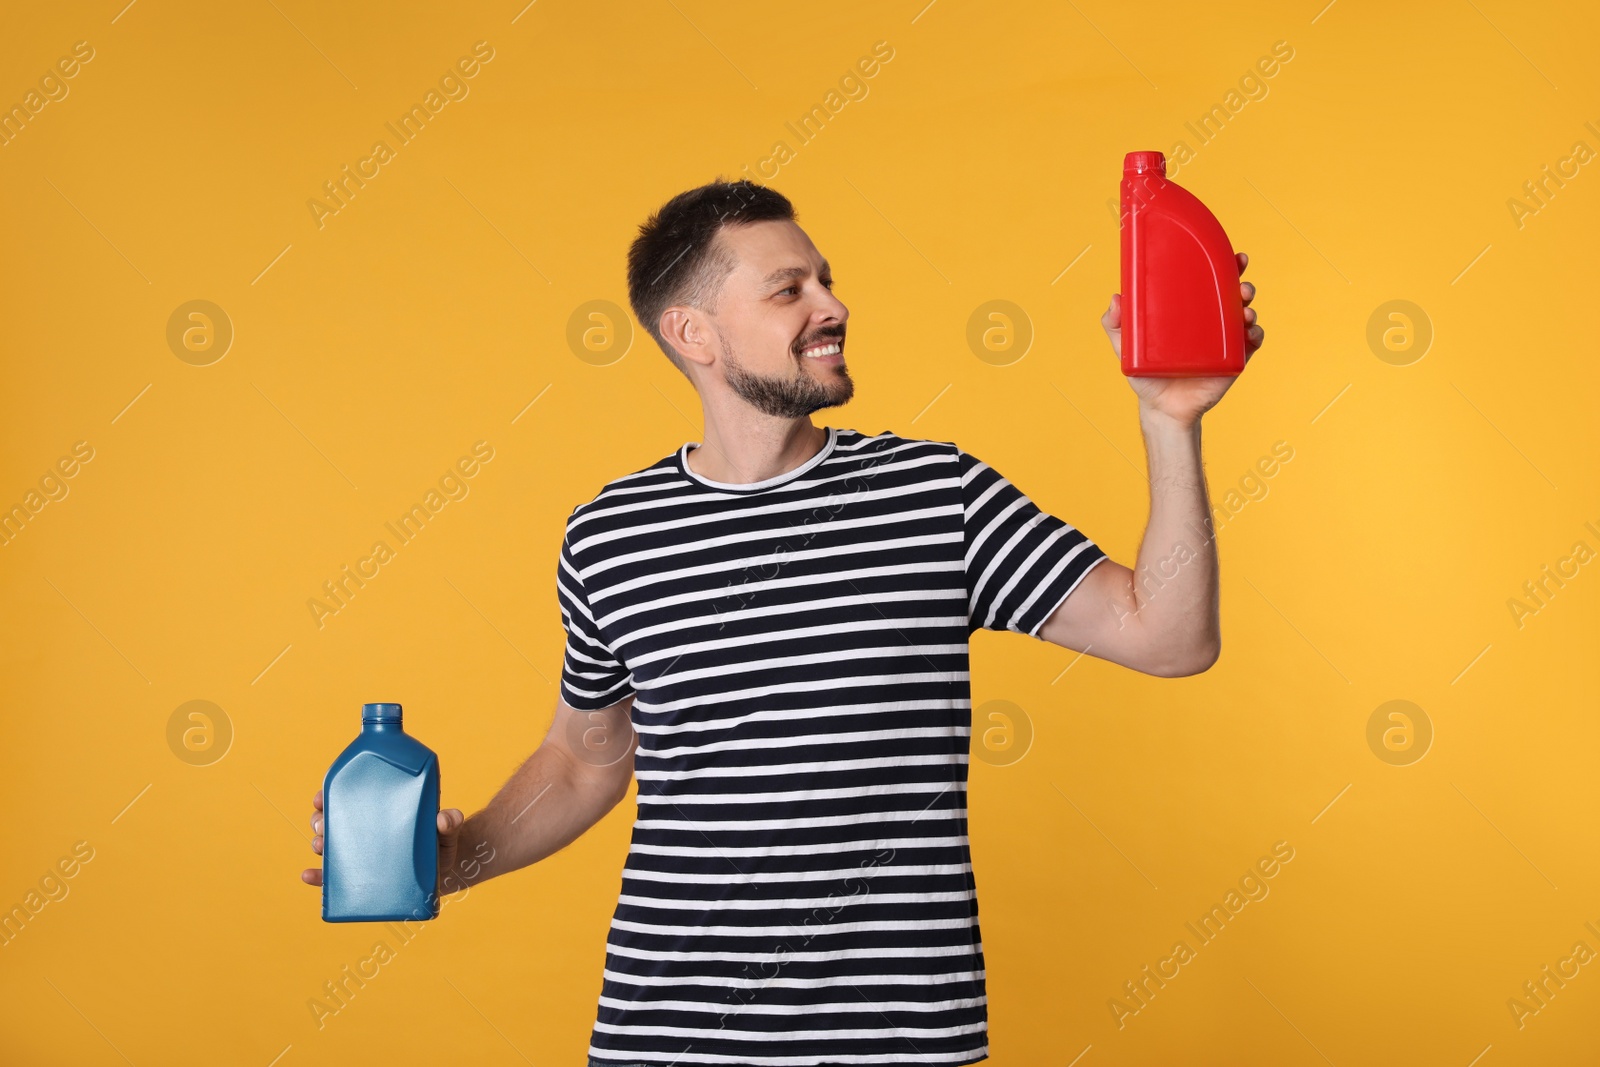 Photo of Man holding two containers of motor oil on orange background